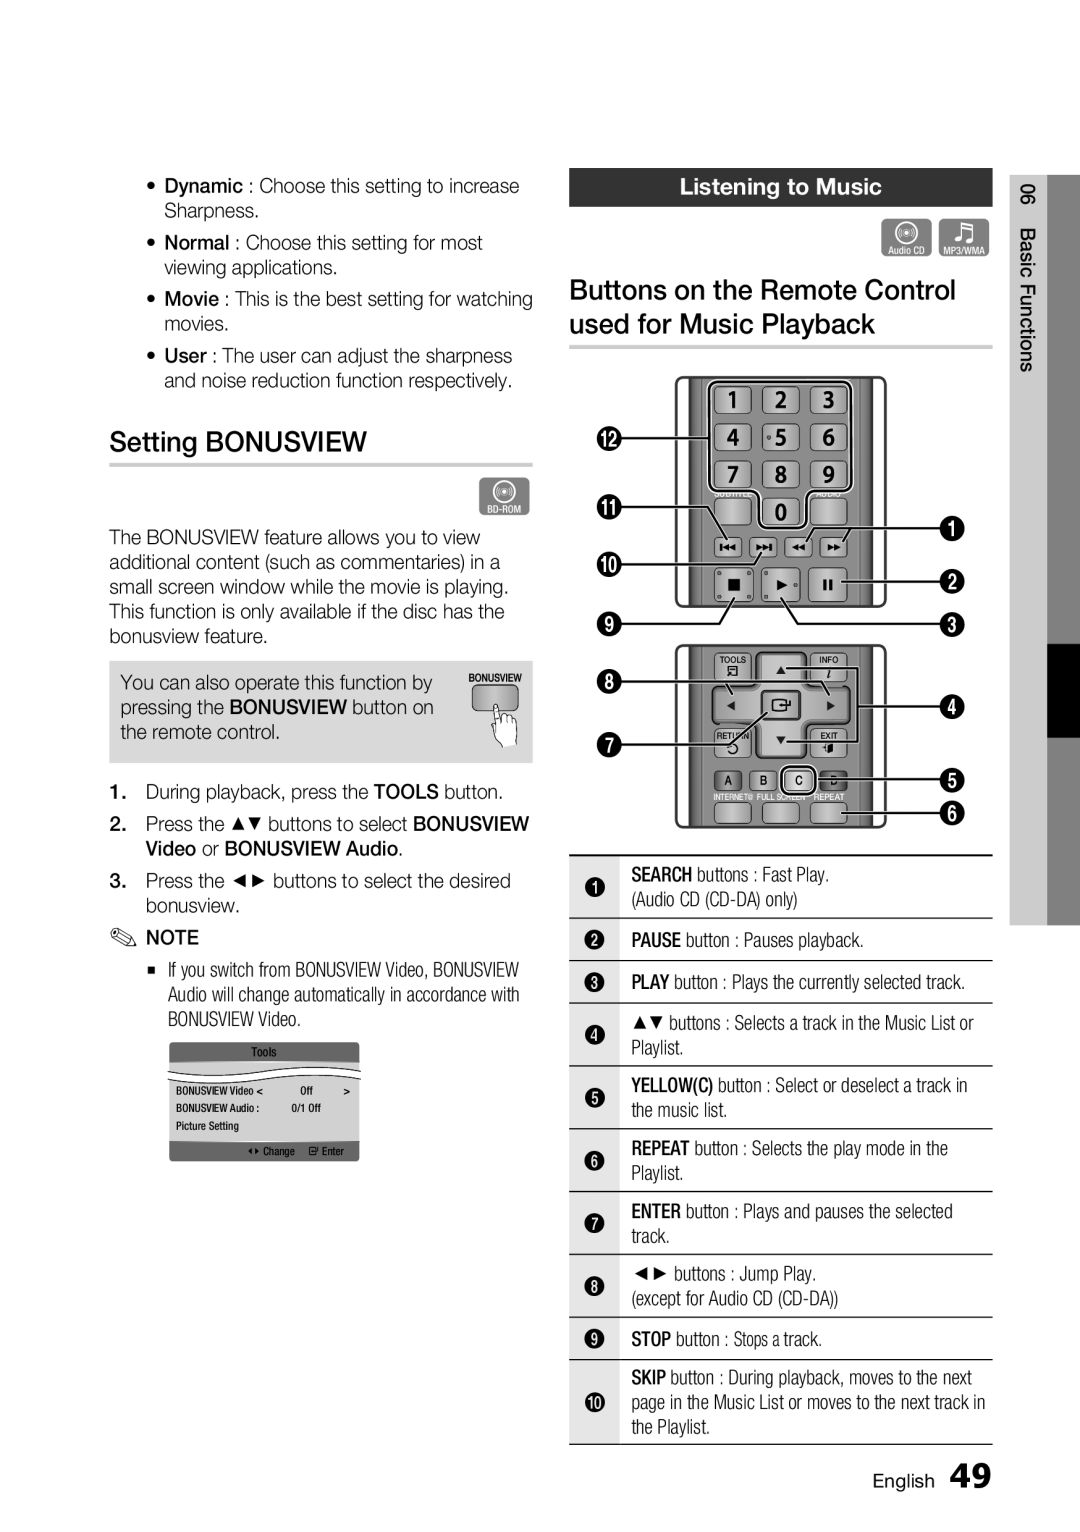 Samsung BD-C6500/XAA manual Setting BONUSVIEW, Buttons on the Remote Control used for Music Playback, Listening to Music 